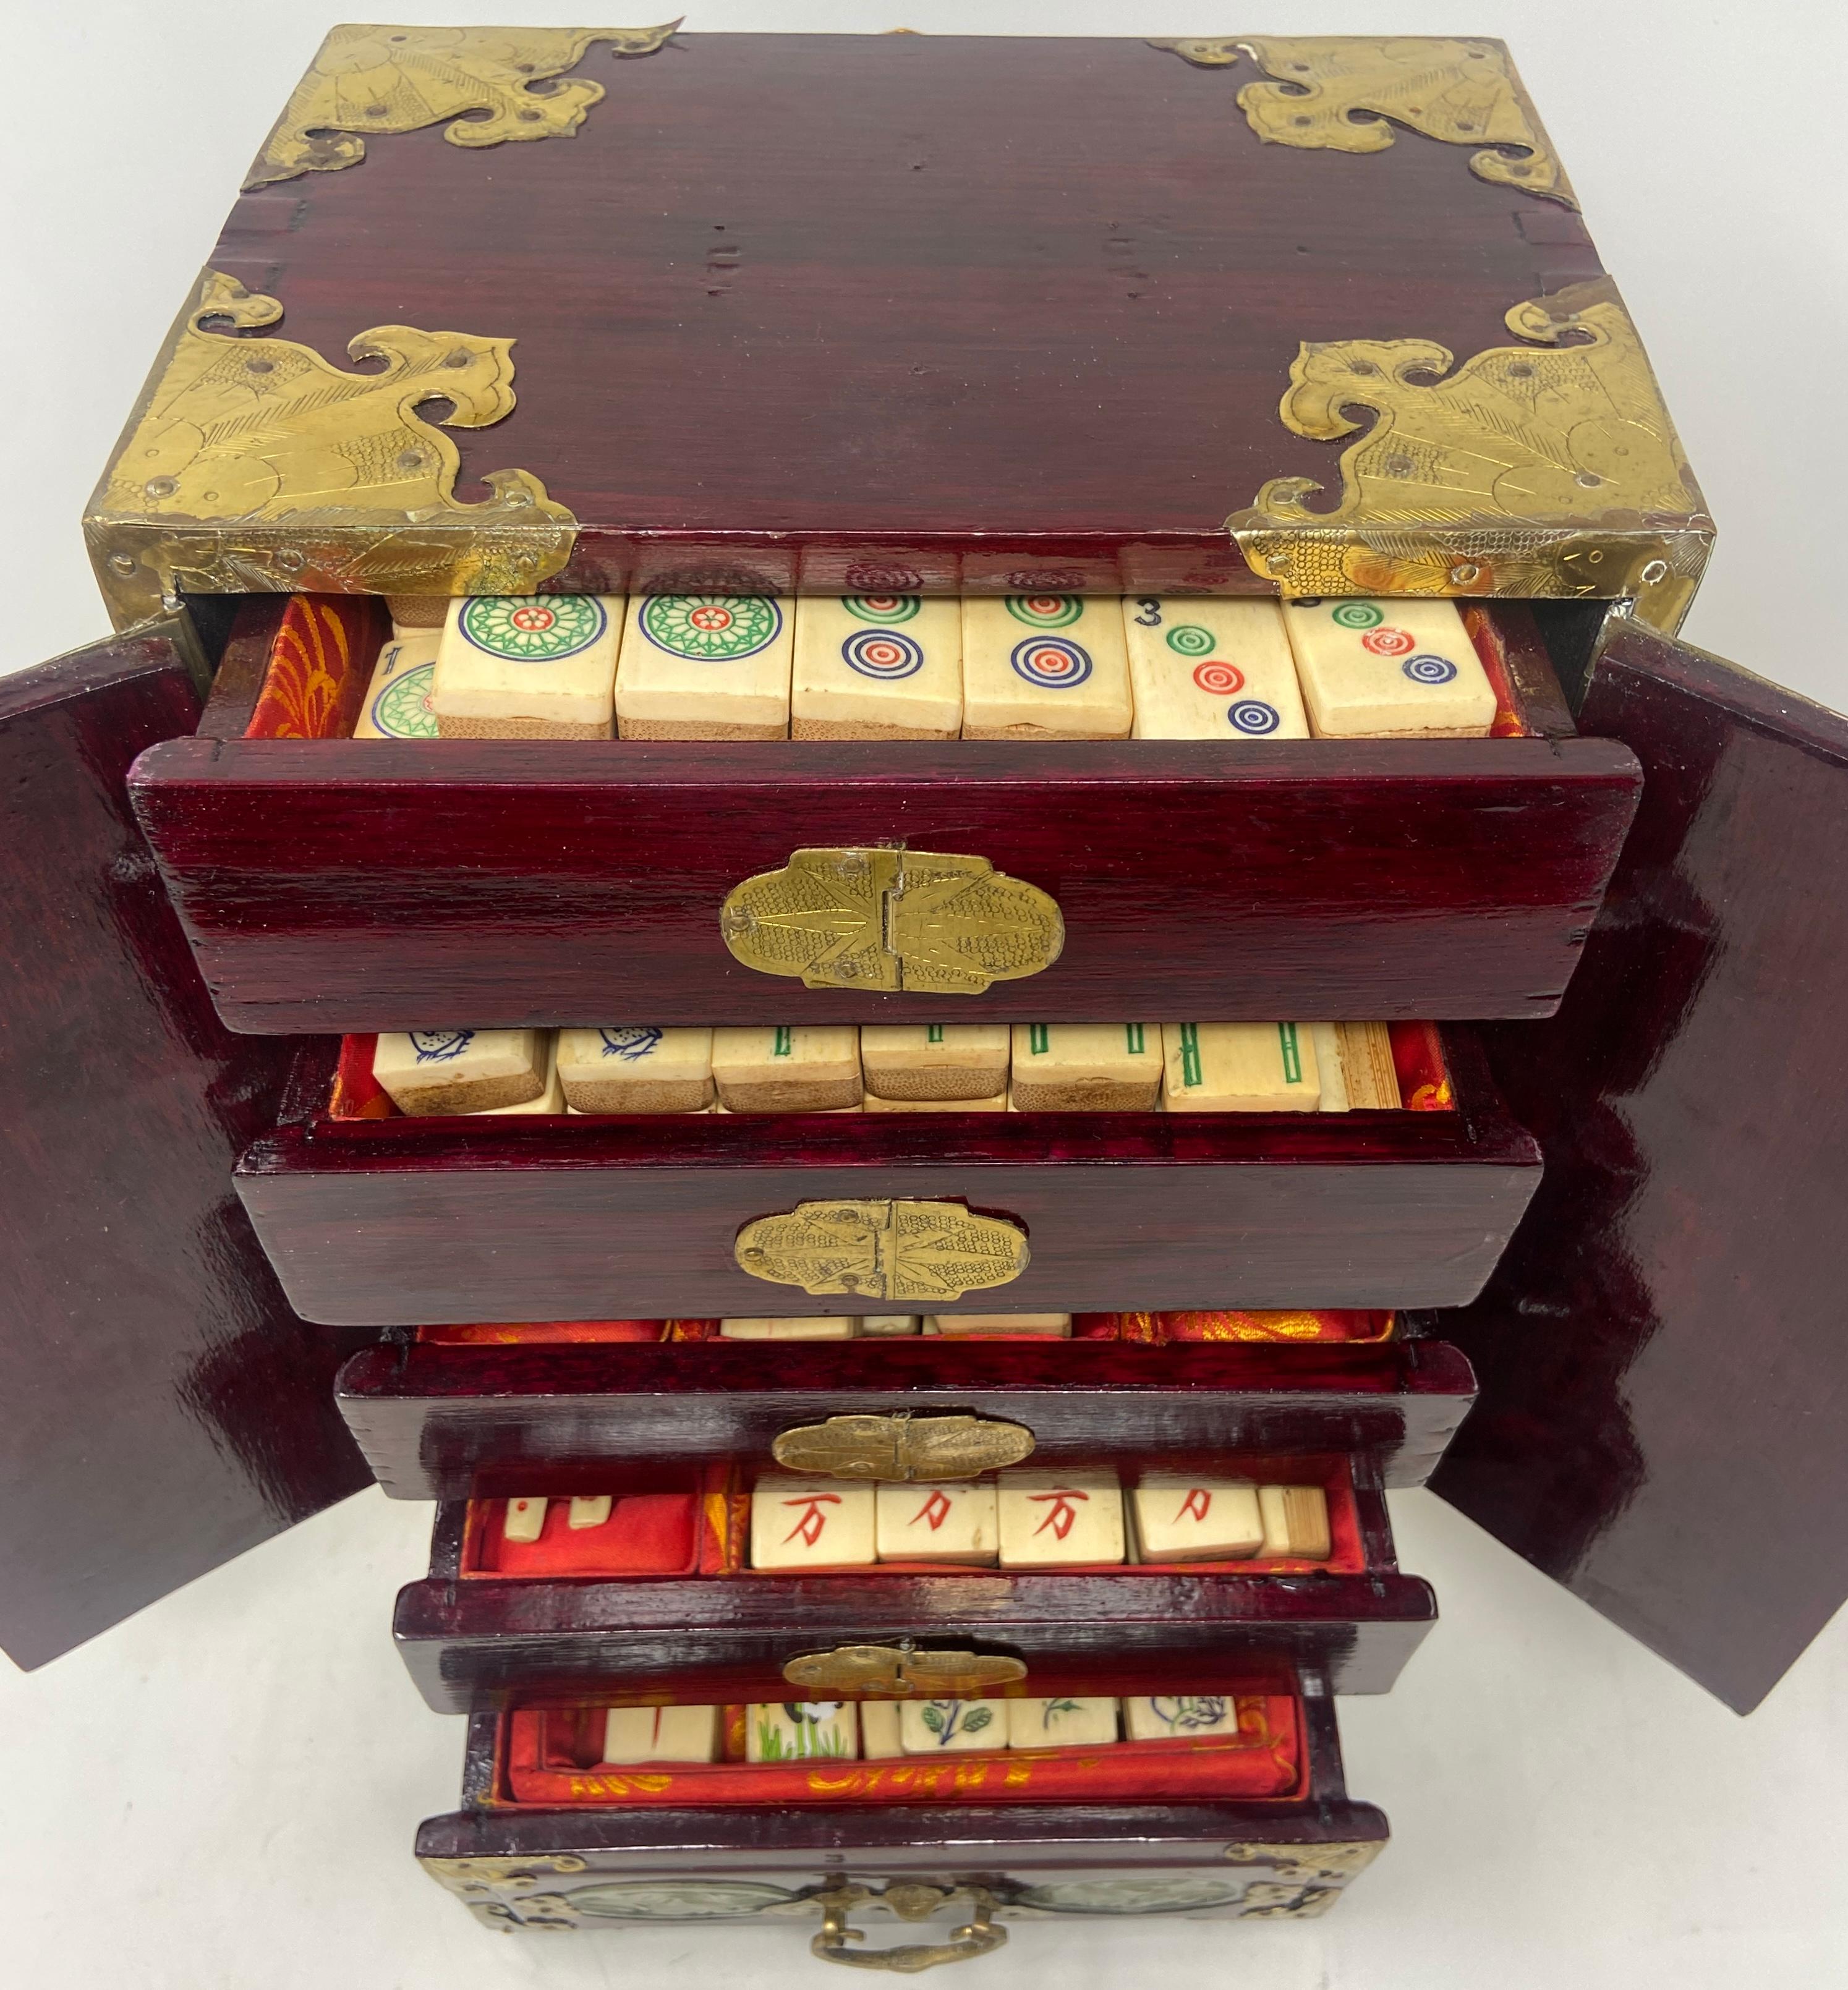 20th Century Antique Chinese Brass-Mounted Red Lacquer Mahjong Set with Jade Inlay